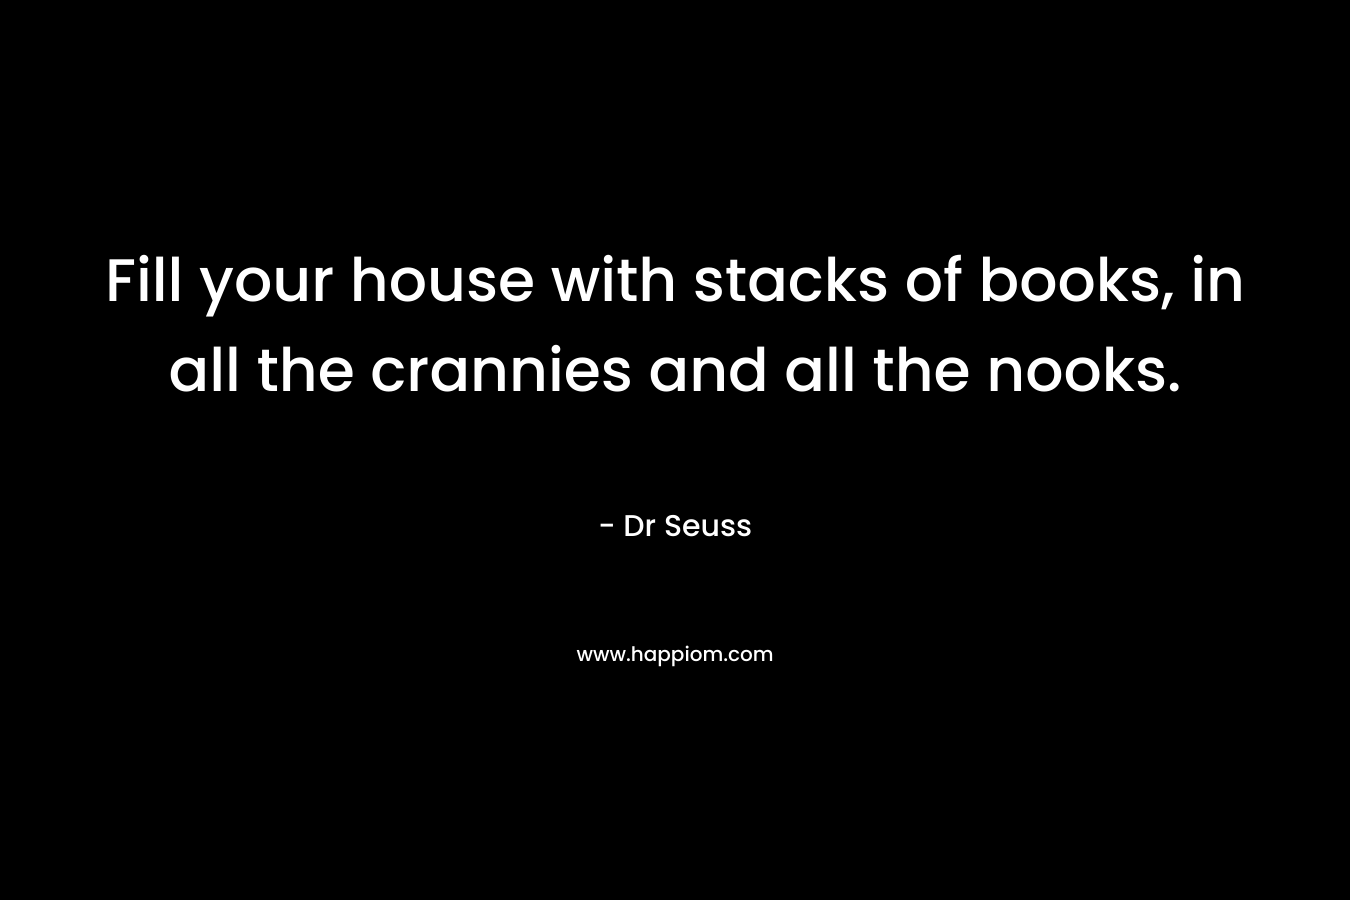 Fill your house with stacks of books, in all the crannies and all the nooks. – Dr Seuss